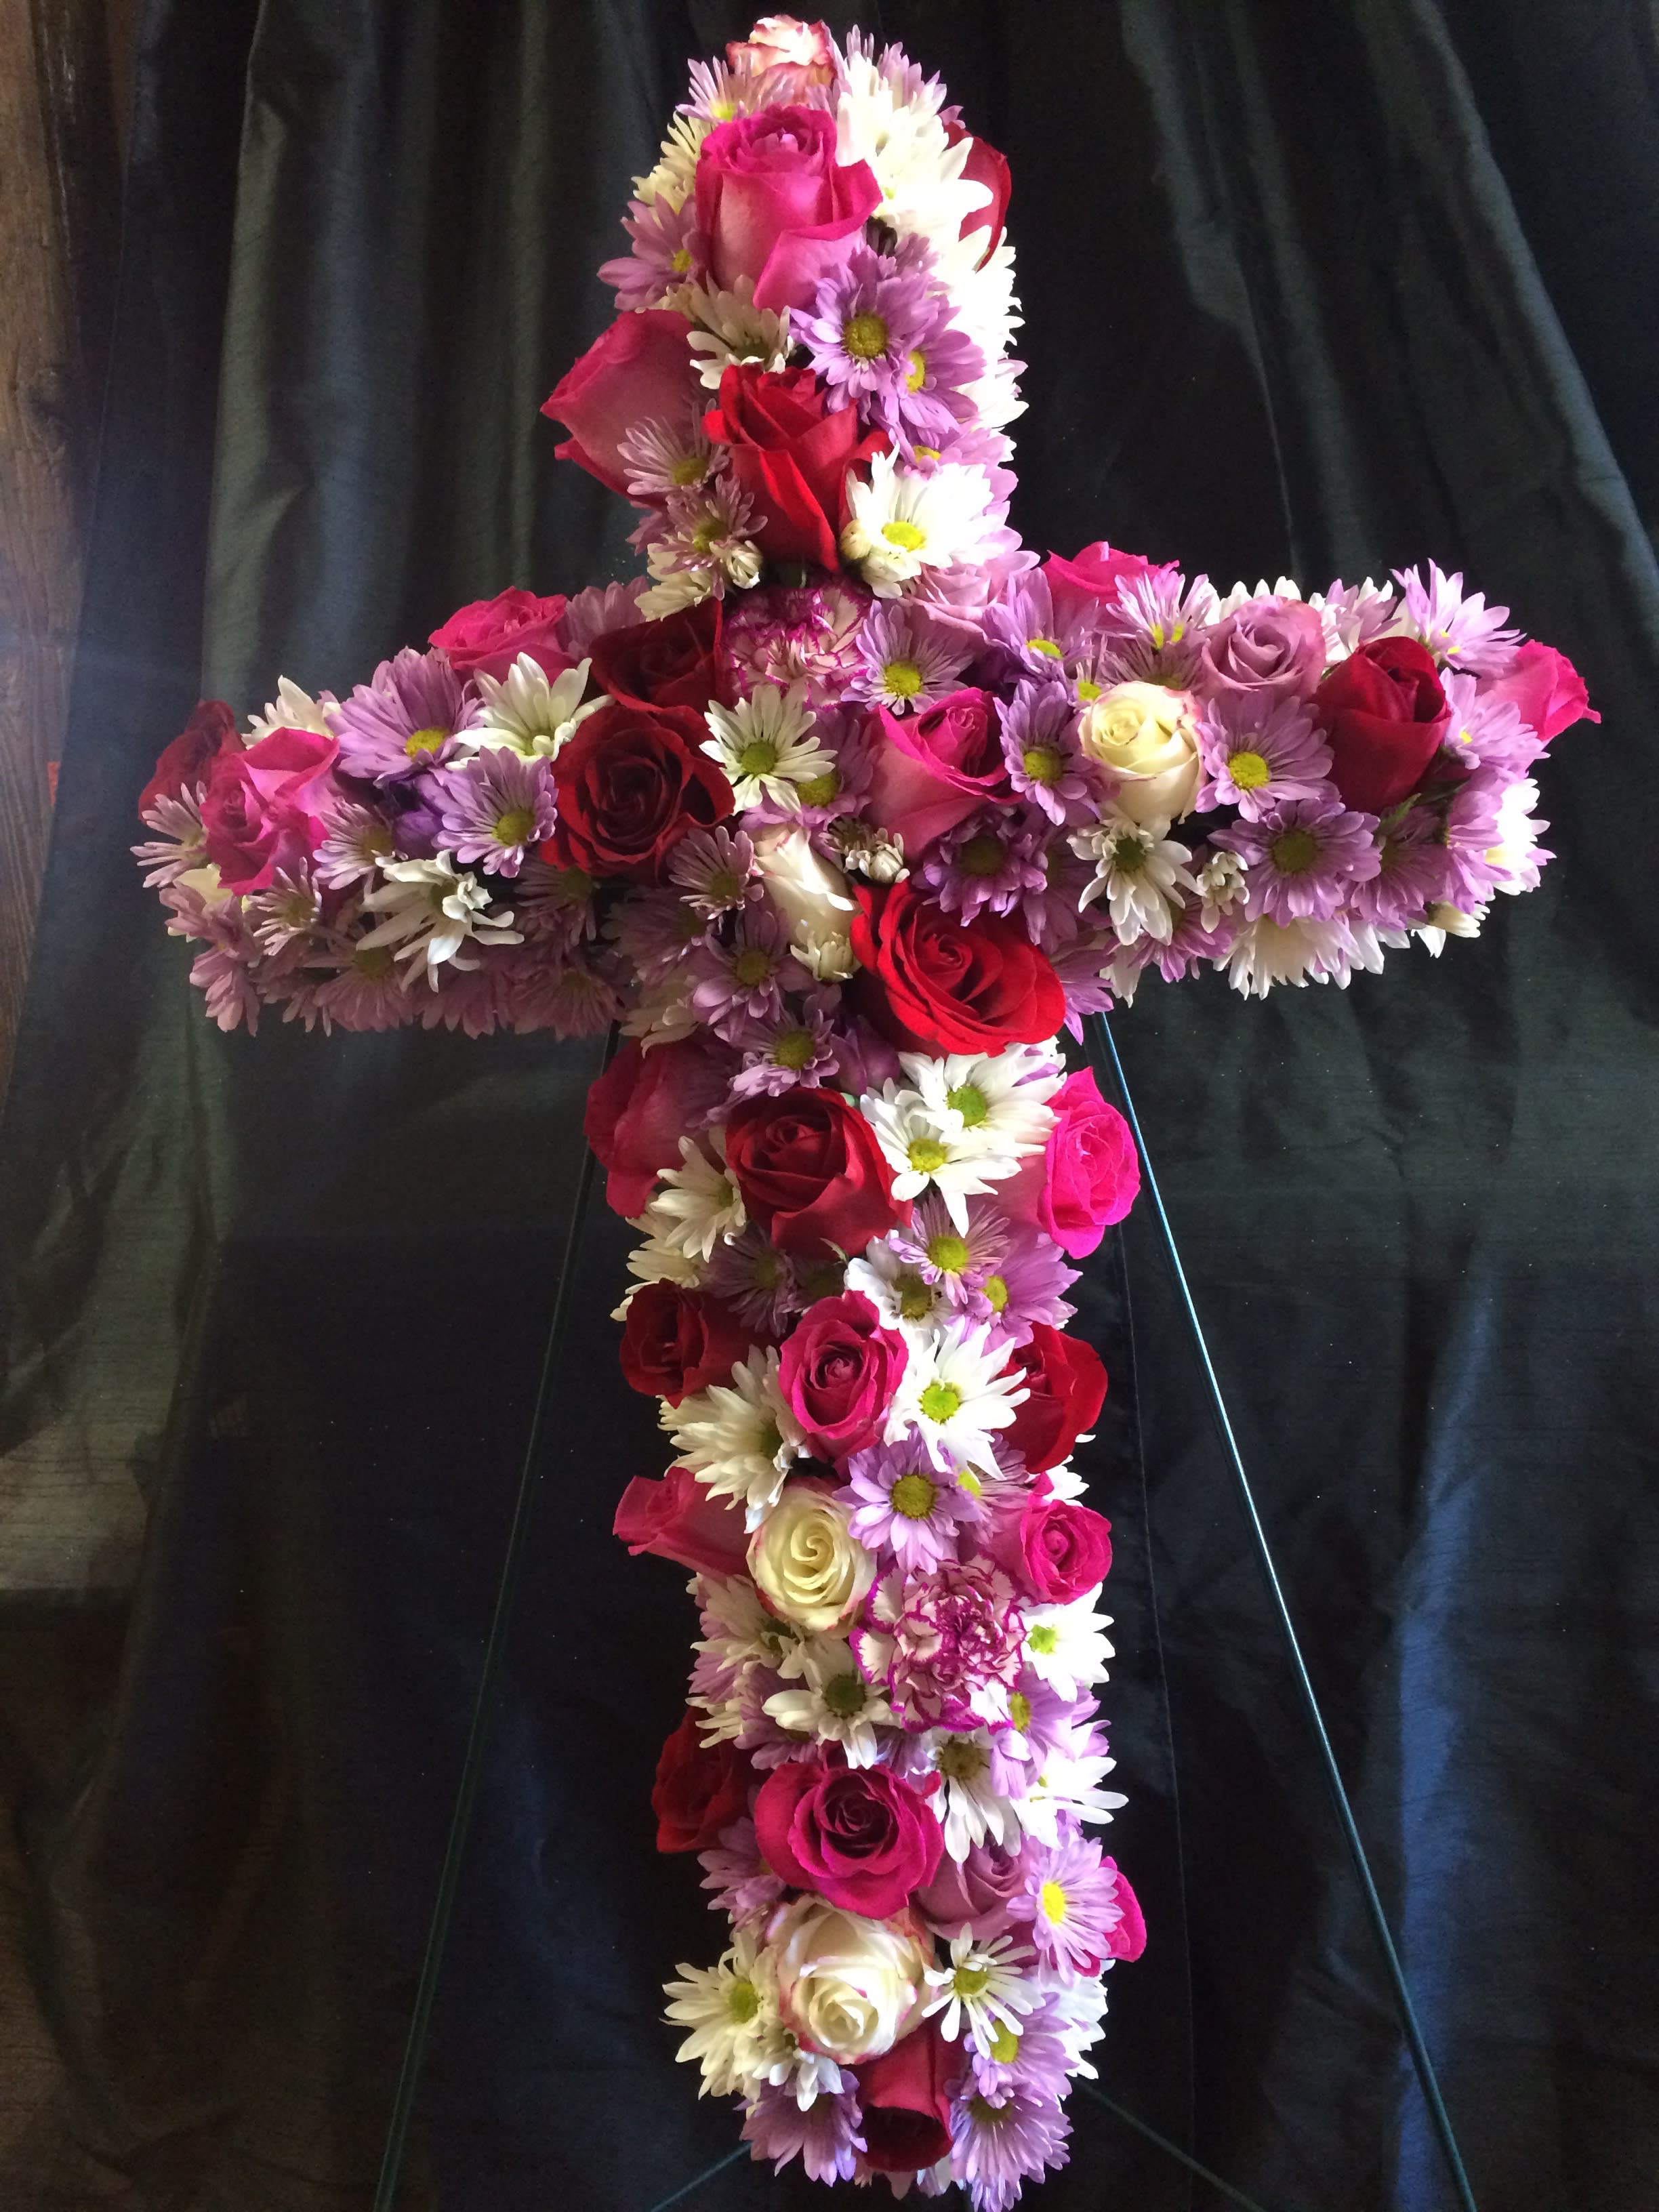 Faith - A beautiful cross full of flowers for your loved one.